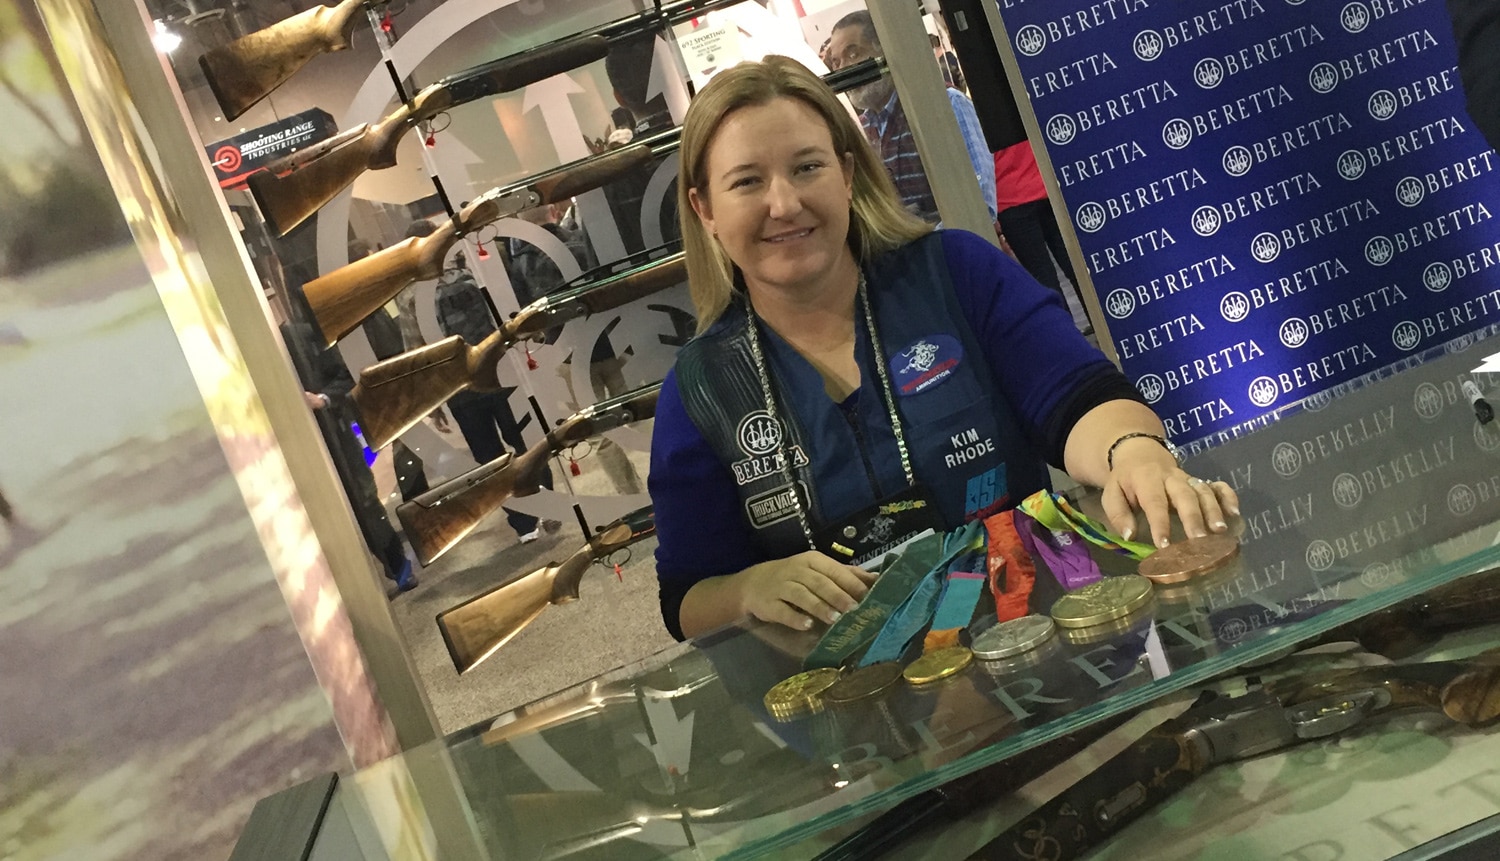 Six-time Olympic medal winner Kim Rhode appeared at the Beretta booth for a meet and greet with fans. In her display case sits the Beretta DT11 shotgun, the gun used to win 10 of 15 medals at the summer Olympic games. (Photo: Daniel Terrill/Guns.com) 